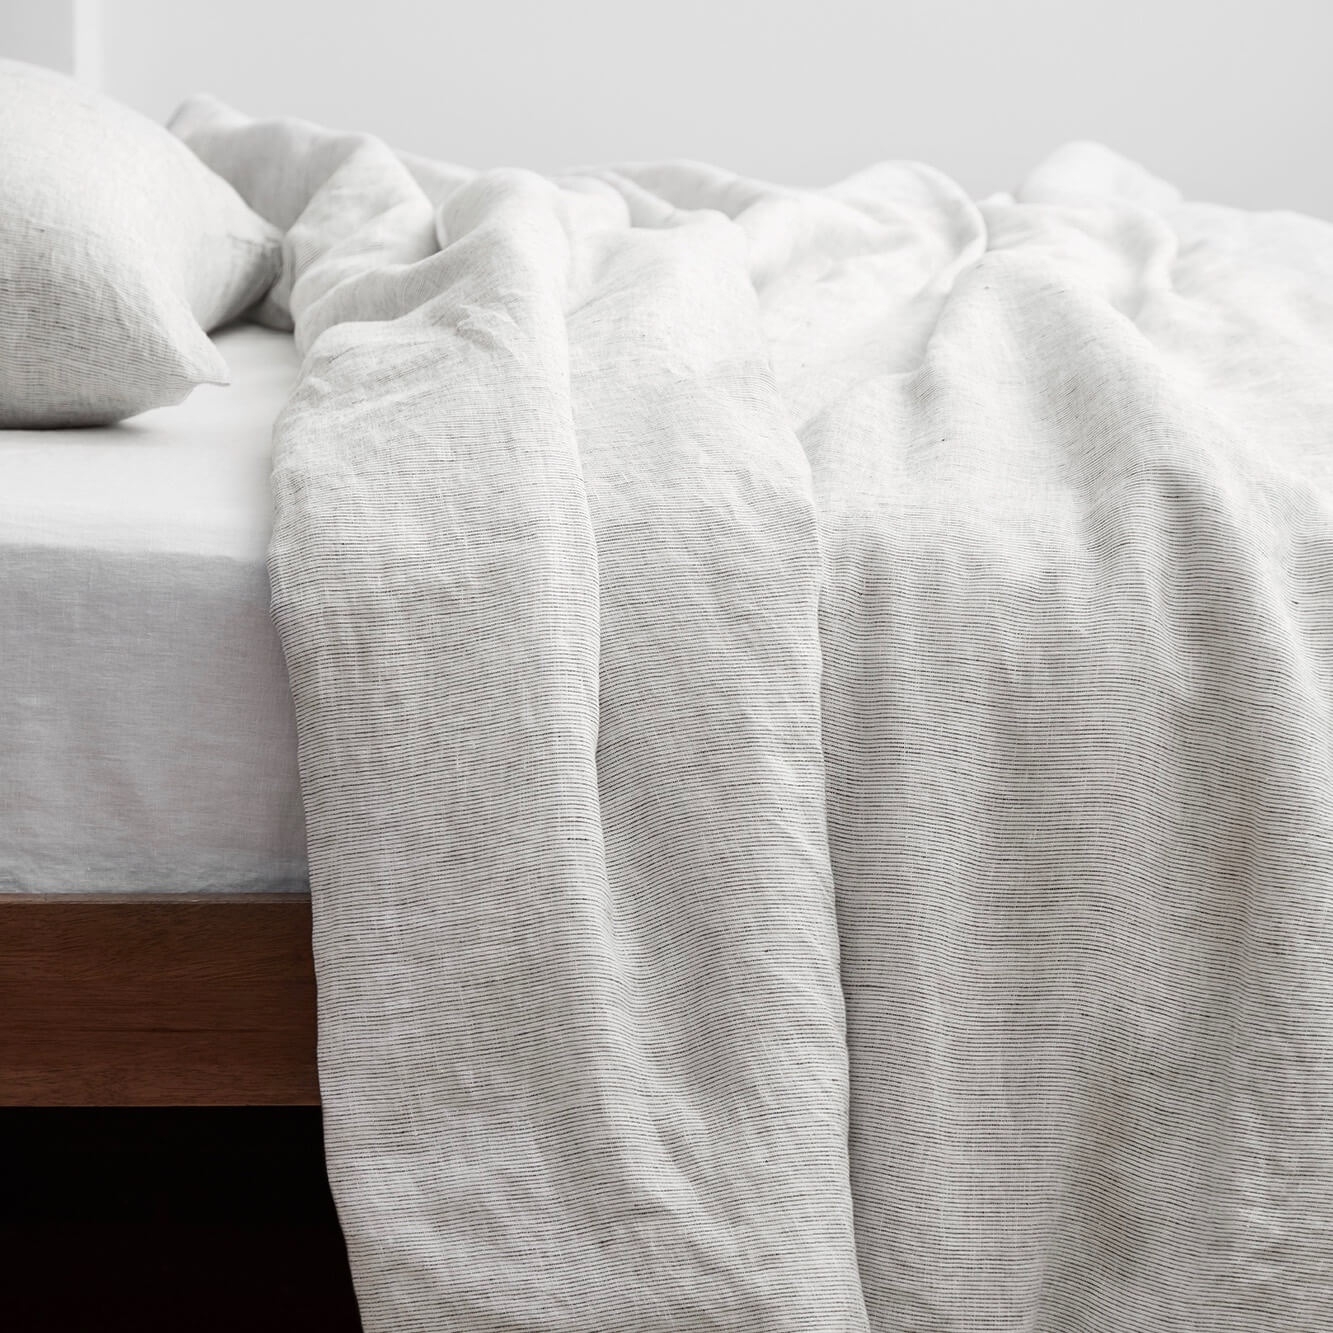 The Citizenry Stonewashed Linen Duvet Cover | Full/Queen | Duvet Only | Indigo Chambray - Image 1